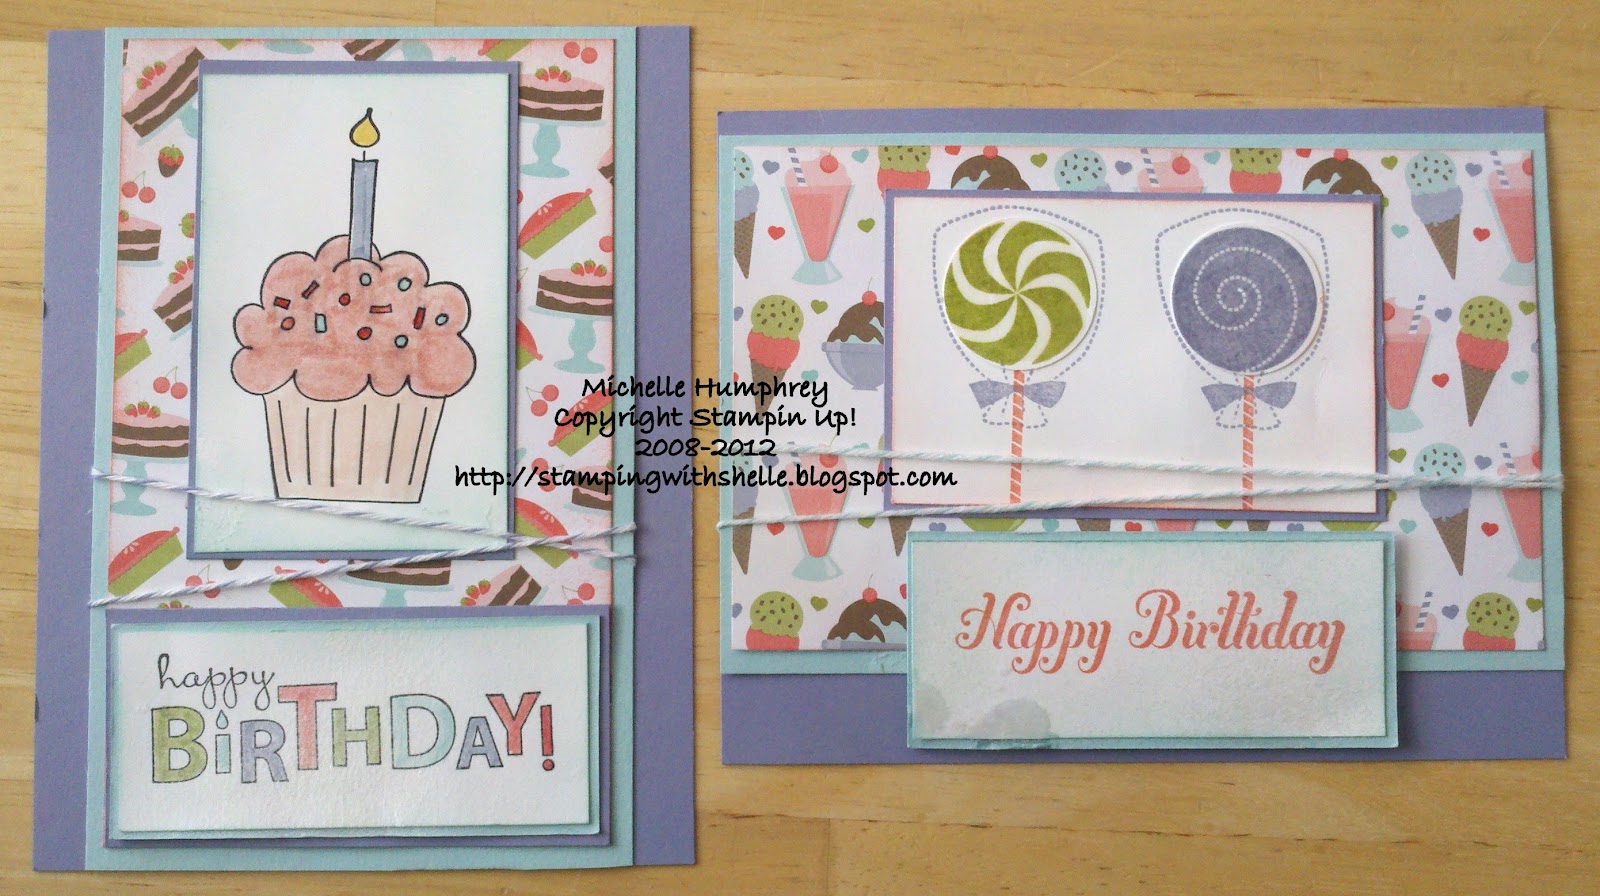 Stamping with Shelle: Scented Sweet Shop Birthday